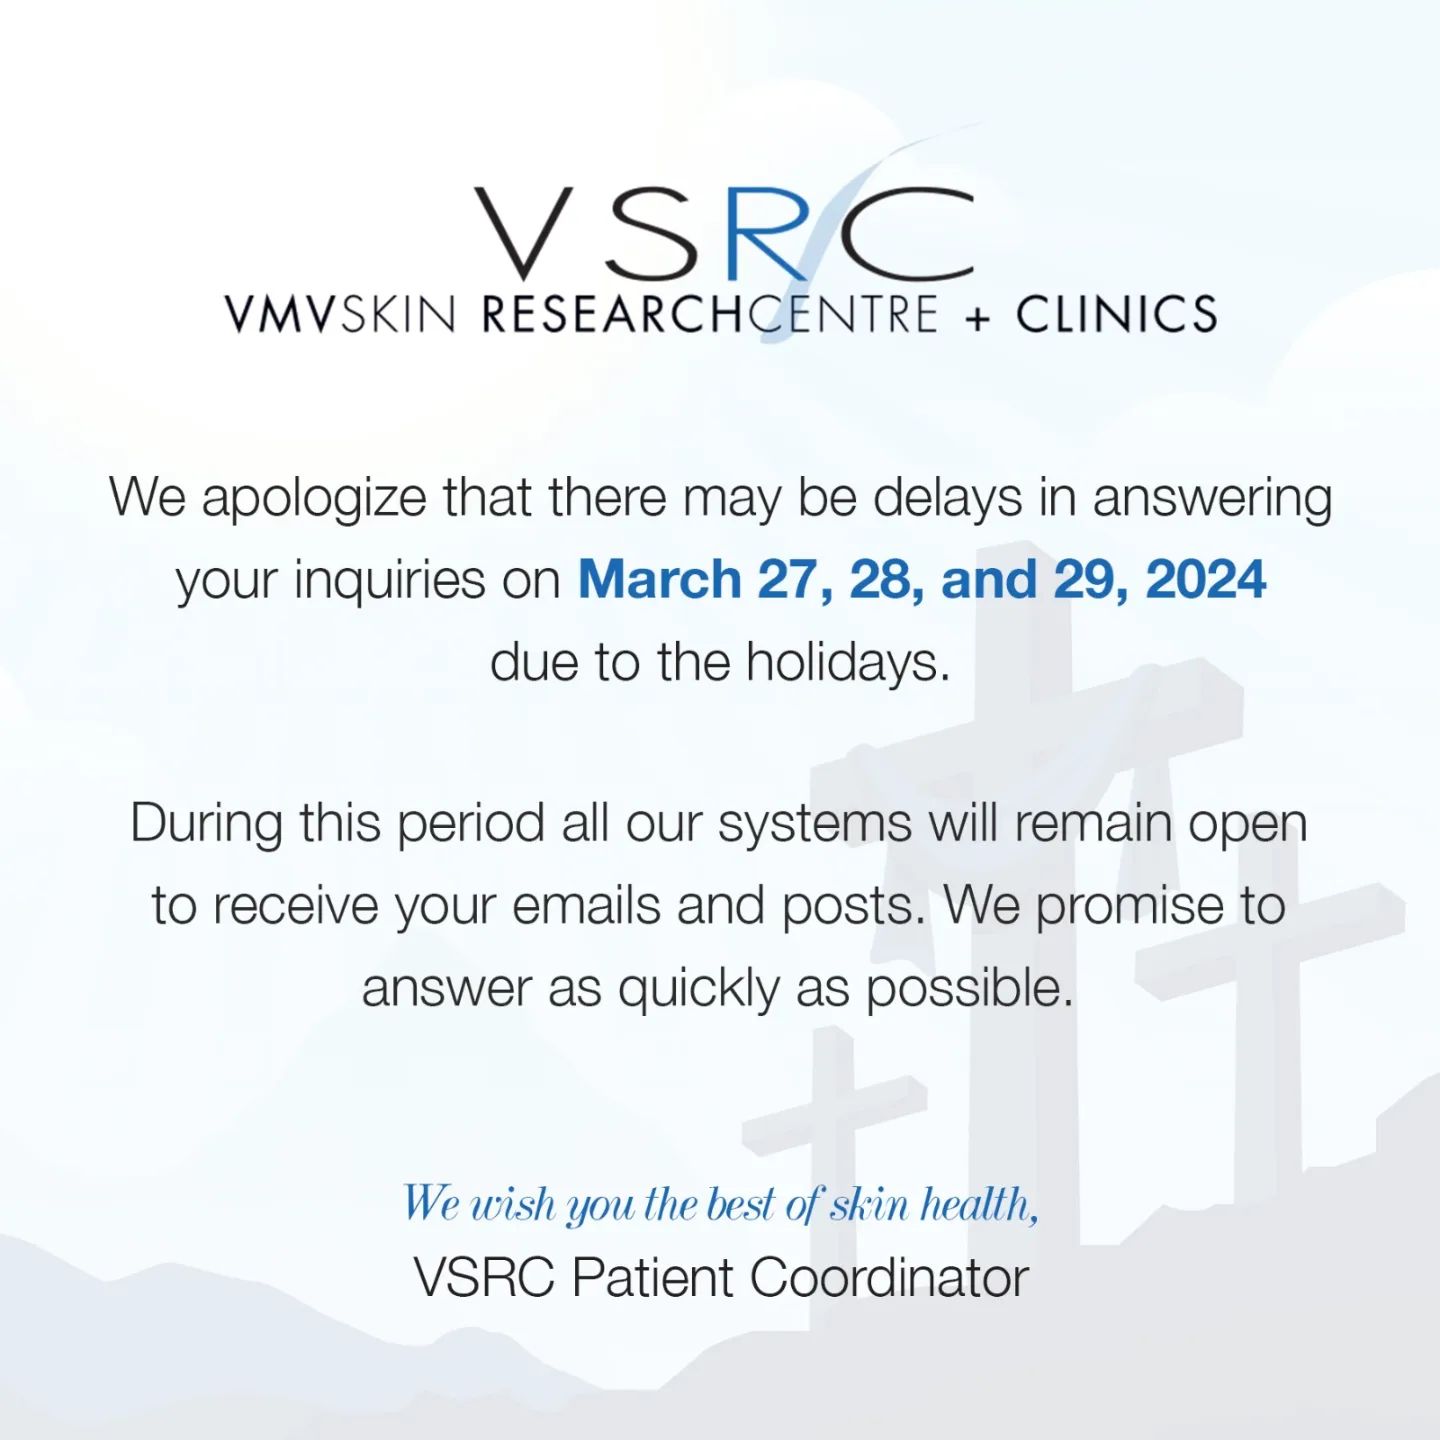 📅 CLINIC HOLIDAY SCHEDULE
Please be advised of the following dates:

Due to Holy Week, VMV Skin-Specialists Centre+Clinic (VSRC) will be closed on the following dates:

March 28 - Maundy Thursday
March 29 - Good Friday

We are closed on weekends. Regular Clinic Operations will resume on April 1, Monday.

Please also note that orders placed online at vmvhypoallergenics.ph starting March 27 will be processed on April 1, Monday.

Thank you and we wish you and yours a peaceful, loving and reflective time!

_____________

• Call (0917) 854 9485 to book your visit or to set up your curbside pickup orders!
• Send us a message to schedule a teleconsultation with our PDS-Certified doctors!

📍 117 Carlos Palanca Street, Legazpi Village, Makati City